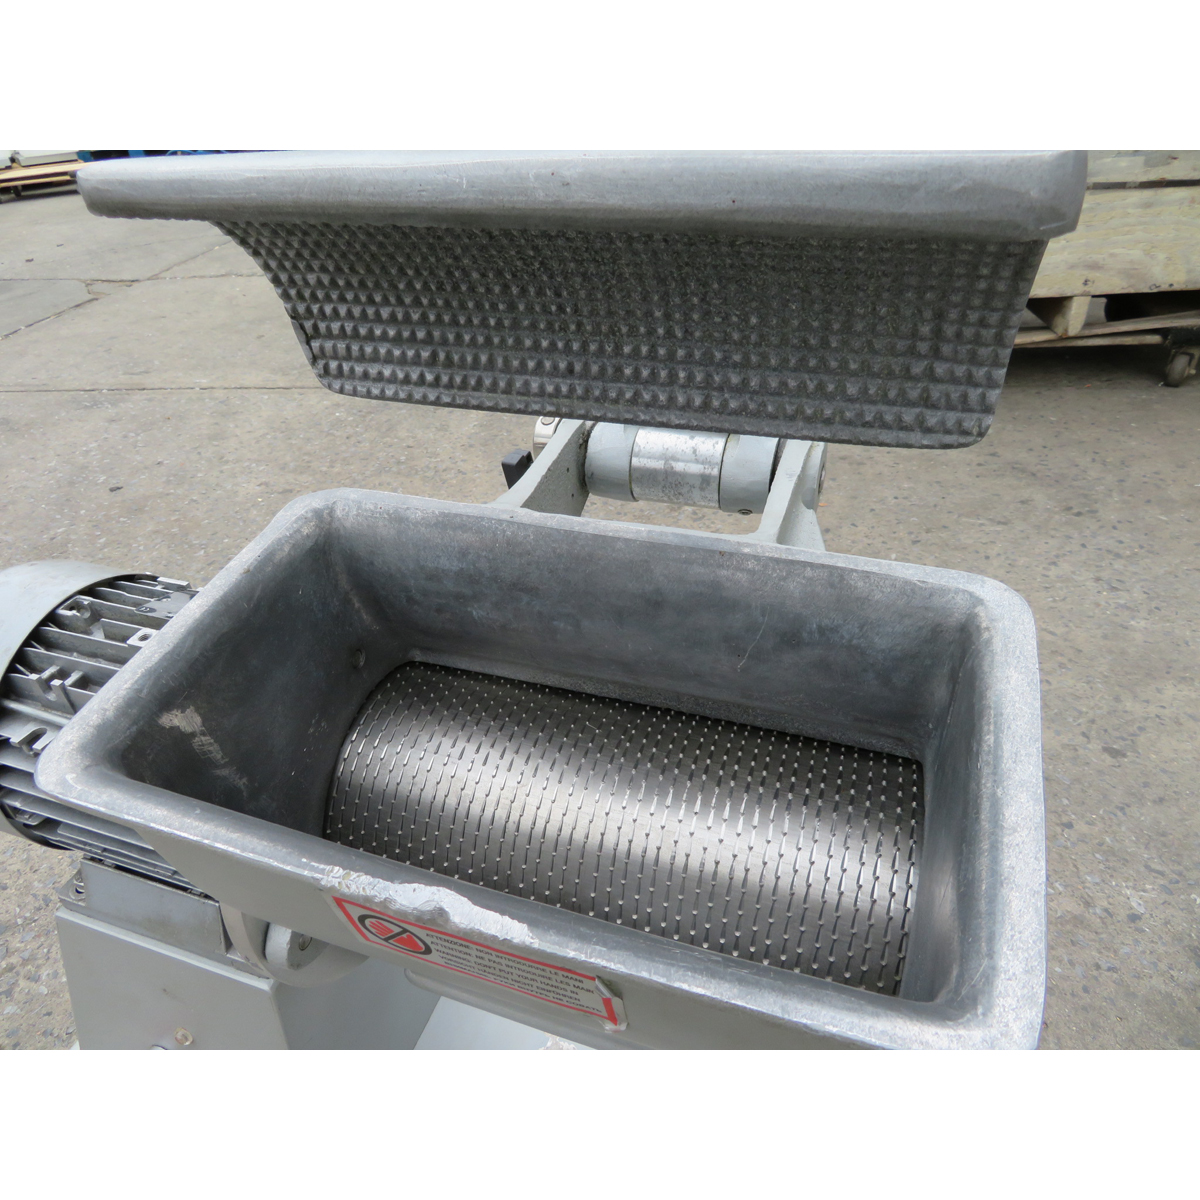 Sirman GFHP4 4HP Cheese Grater/ Bread Crumber, Used Excellent Condition image 2